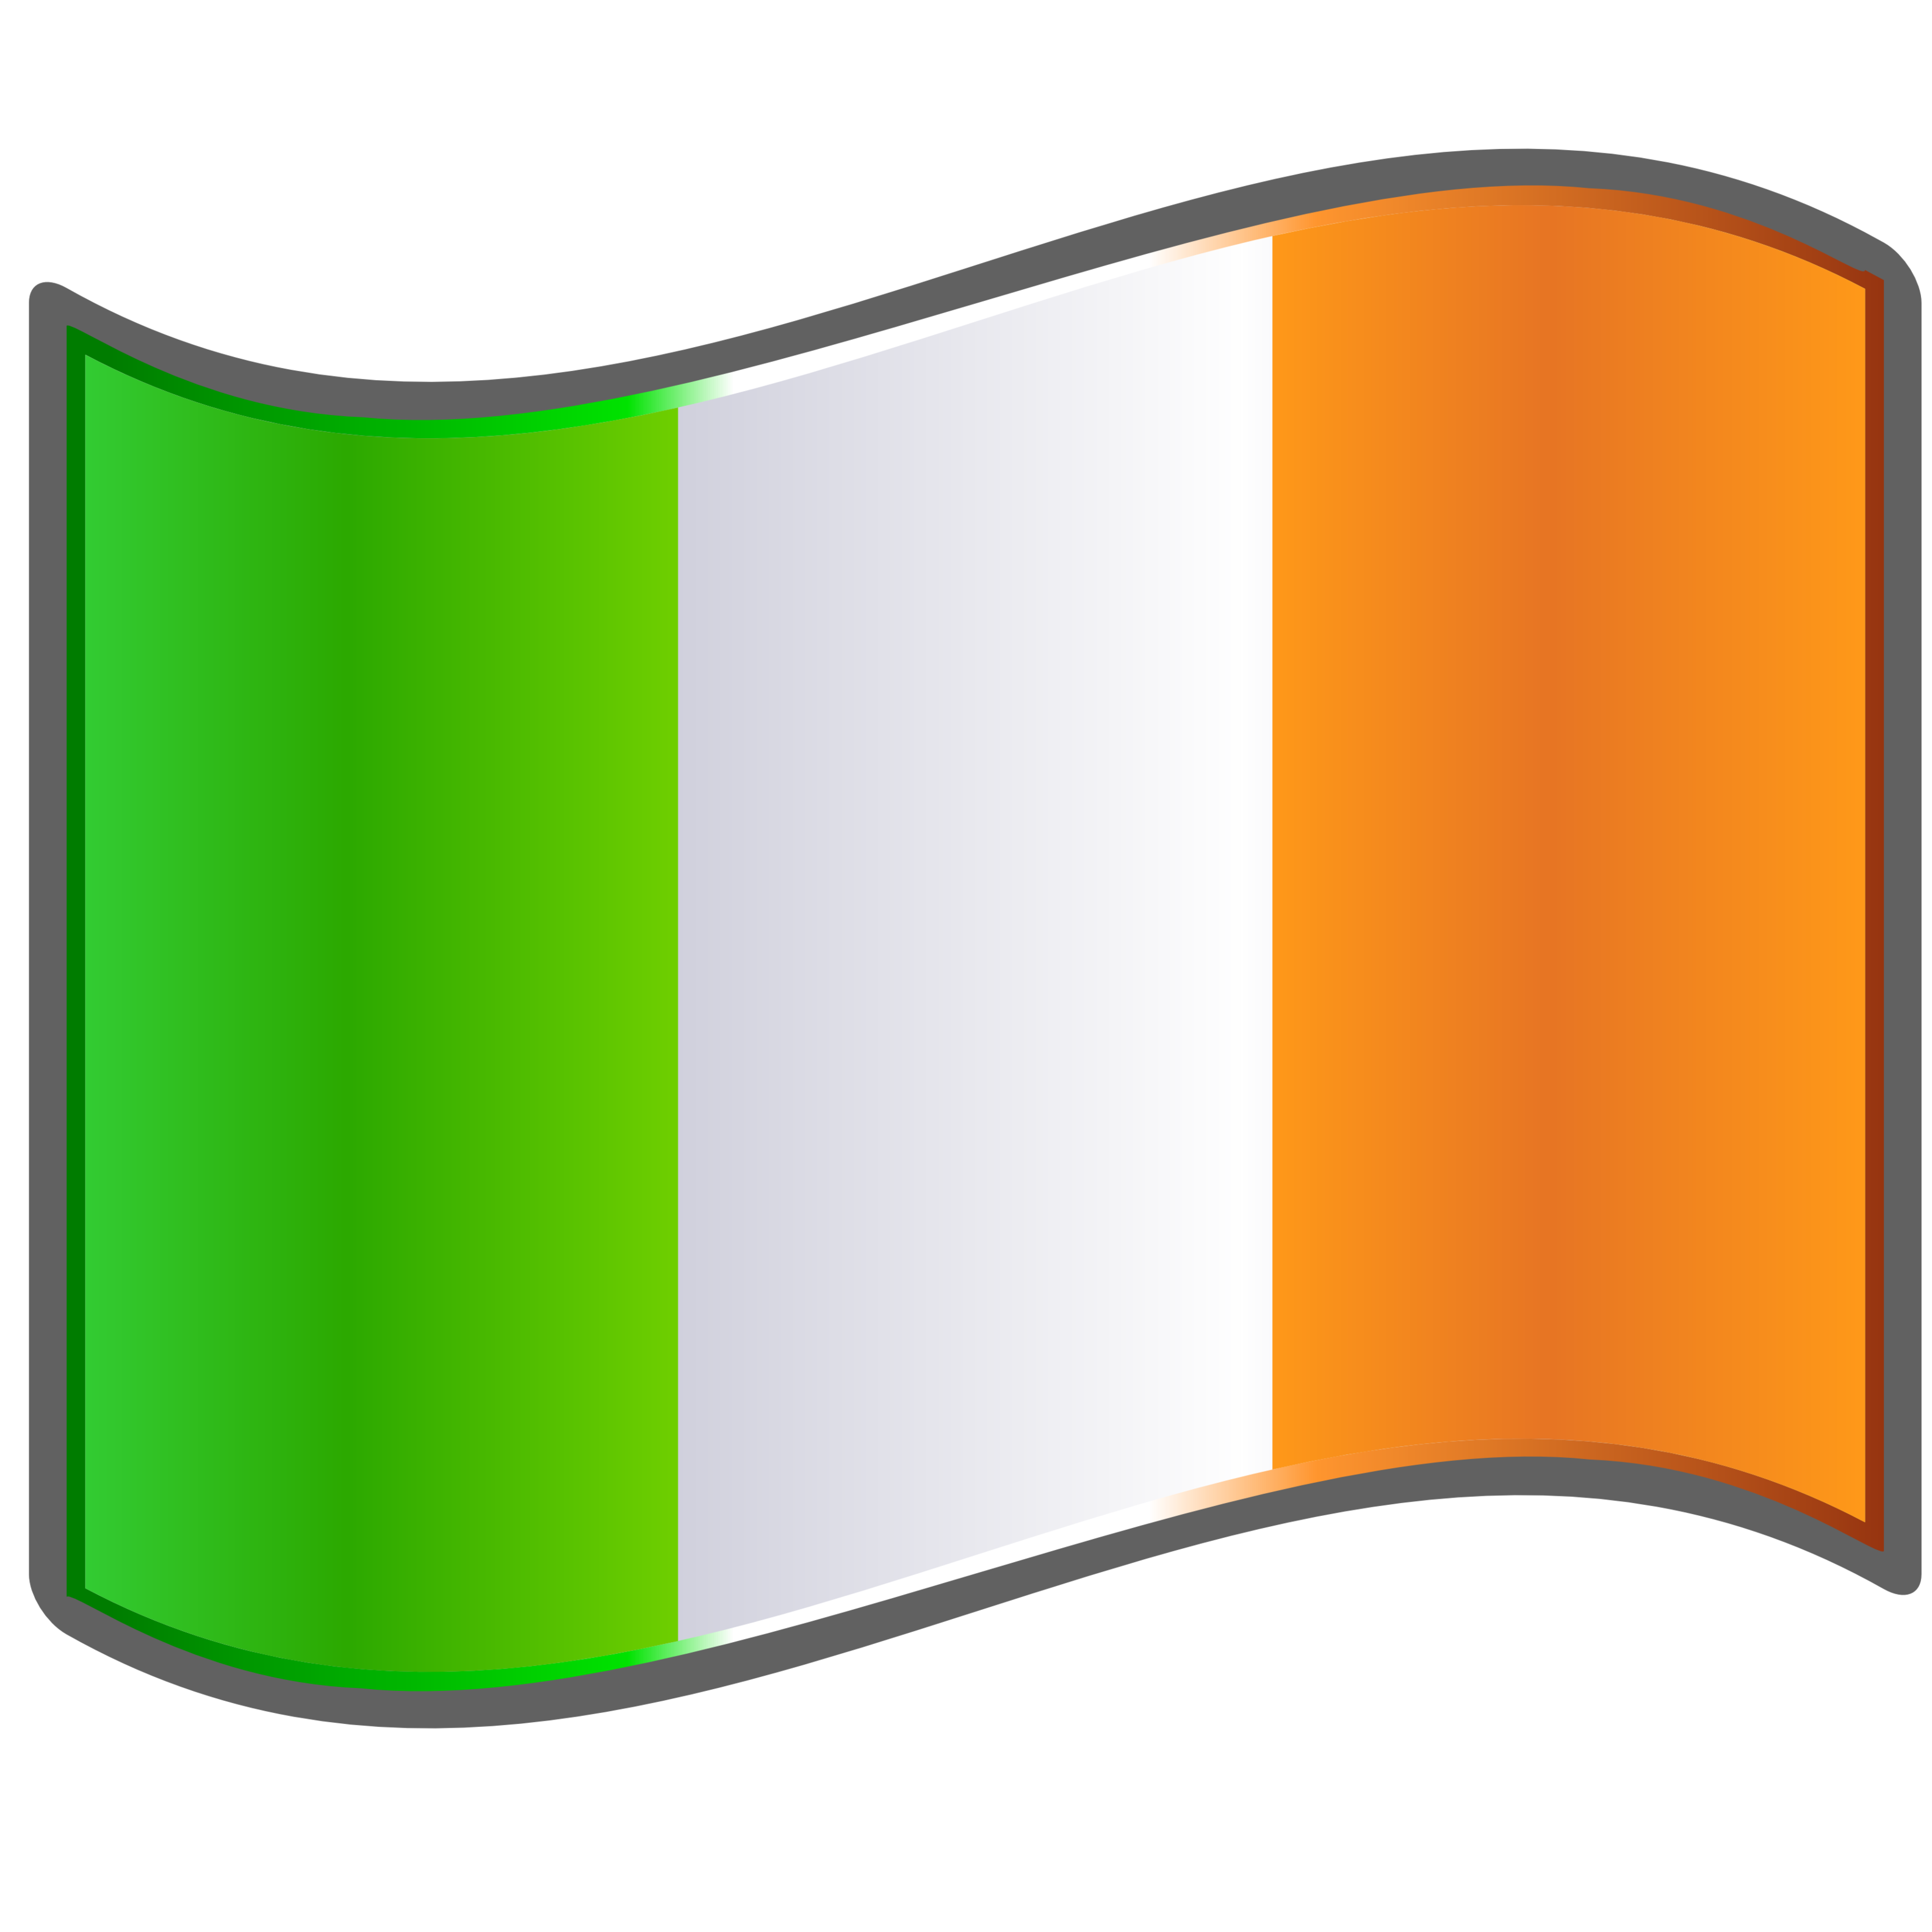 Irish Symbols Good To Know About Ireland Clipart - Free to use ...